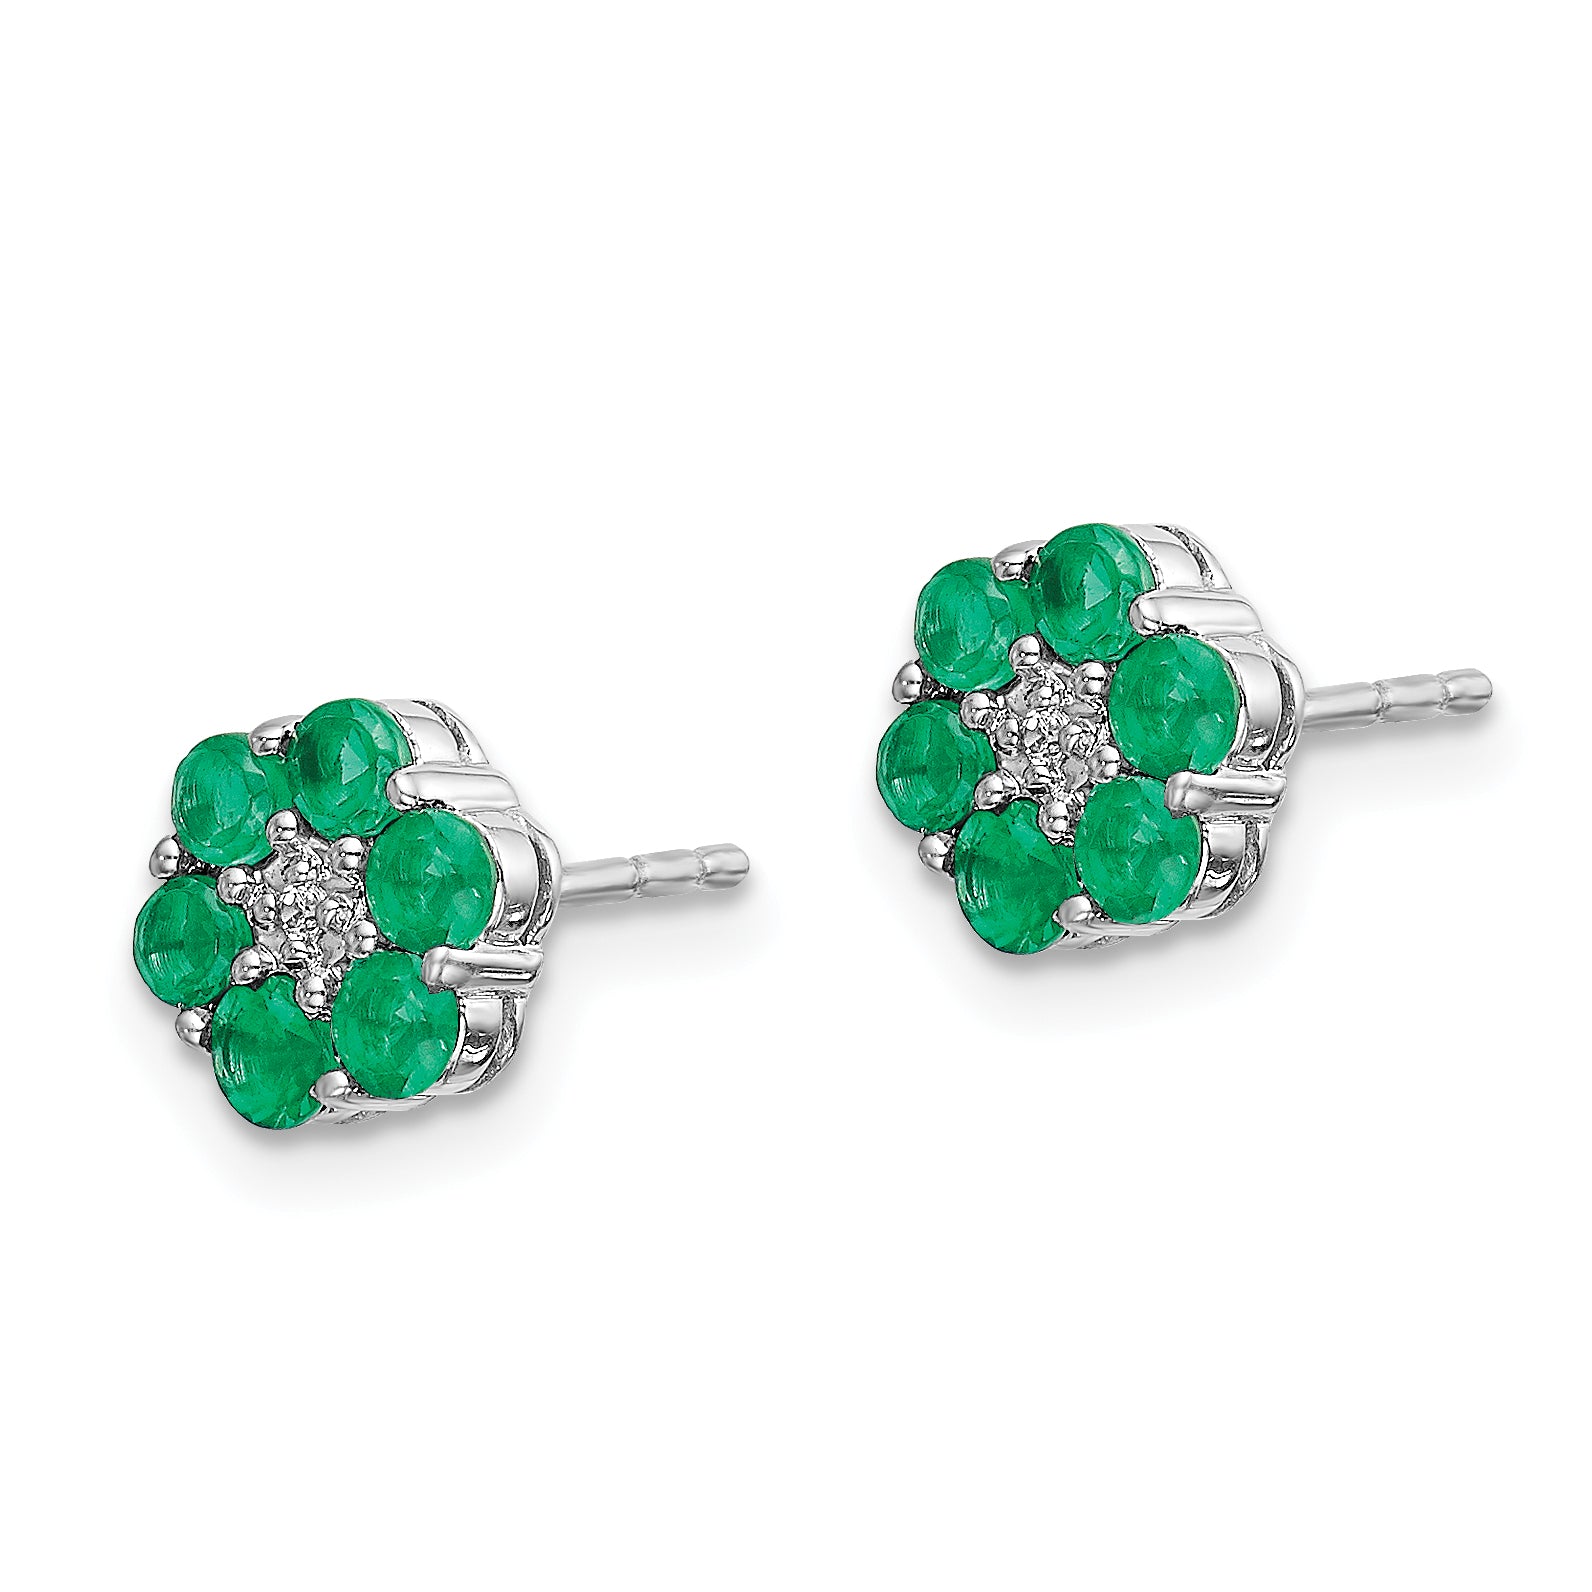 10k White Gold Polished Emerald and Diamond Post Earrings